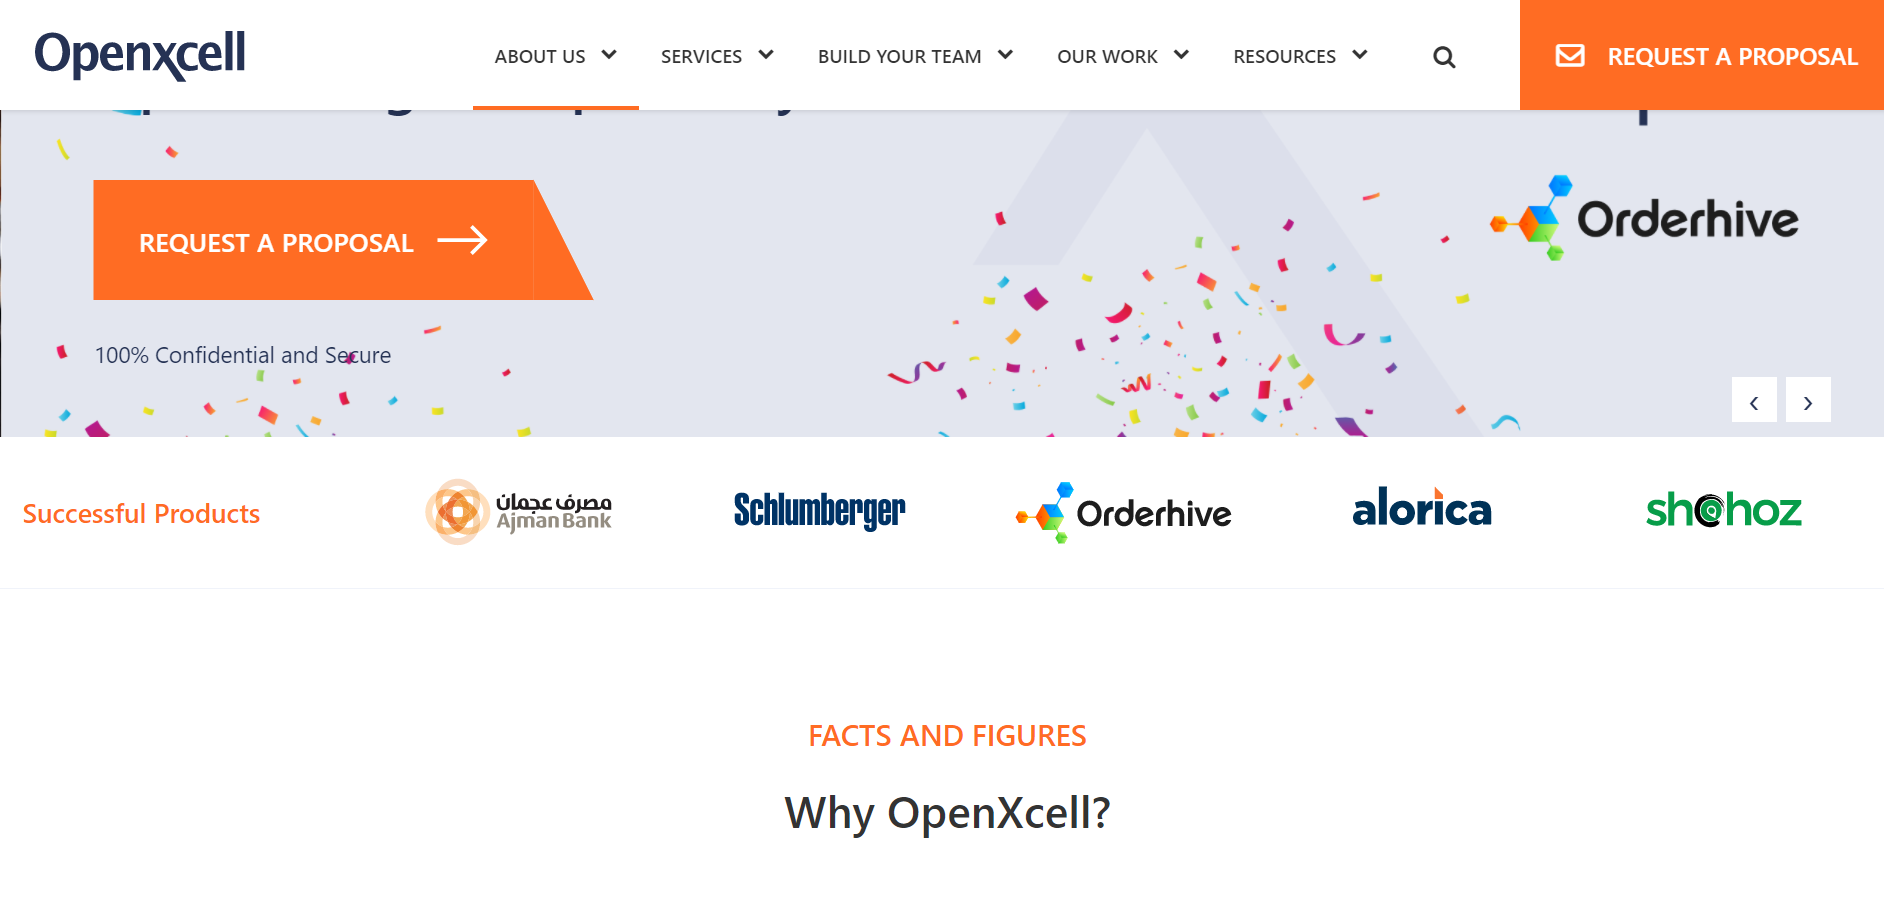 Openxcell